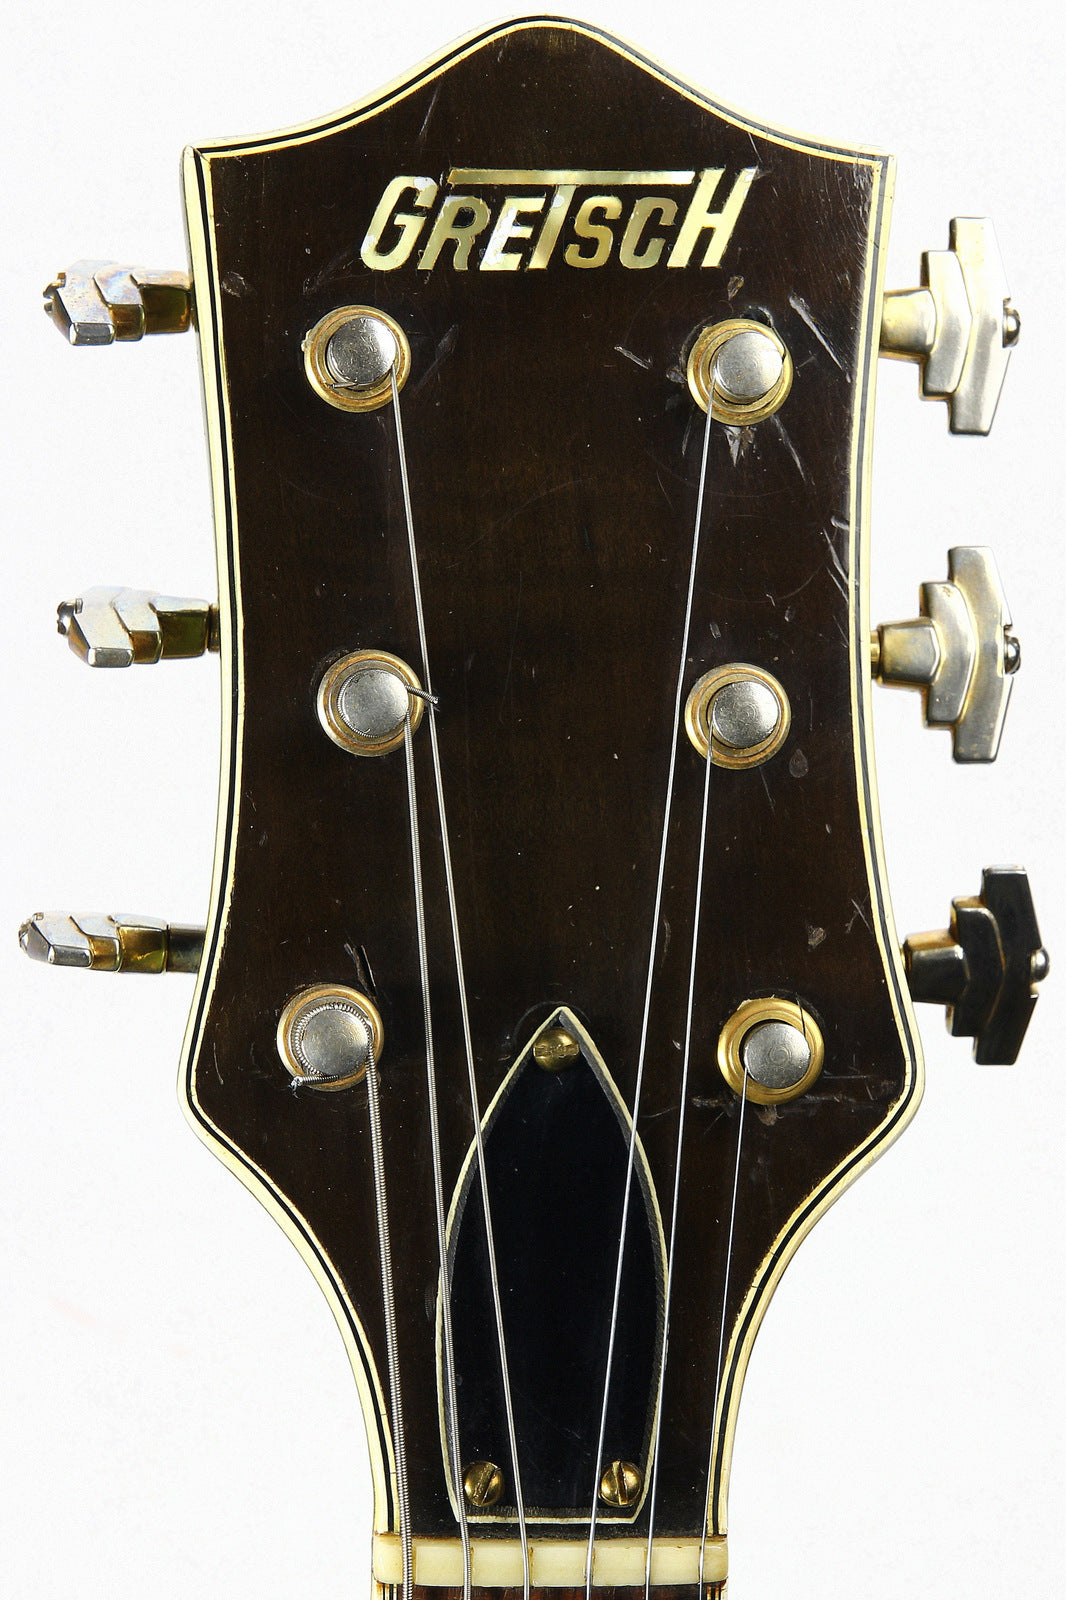 Gretsch headstock with brand logo and Grover imperial tuners